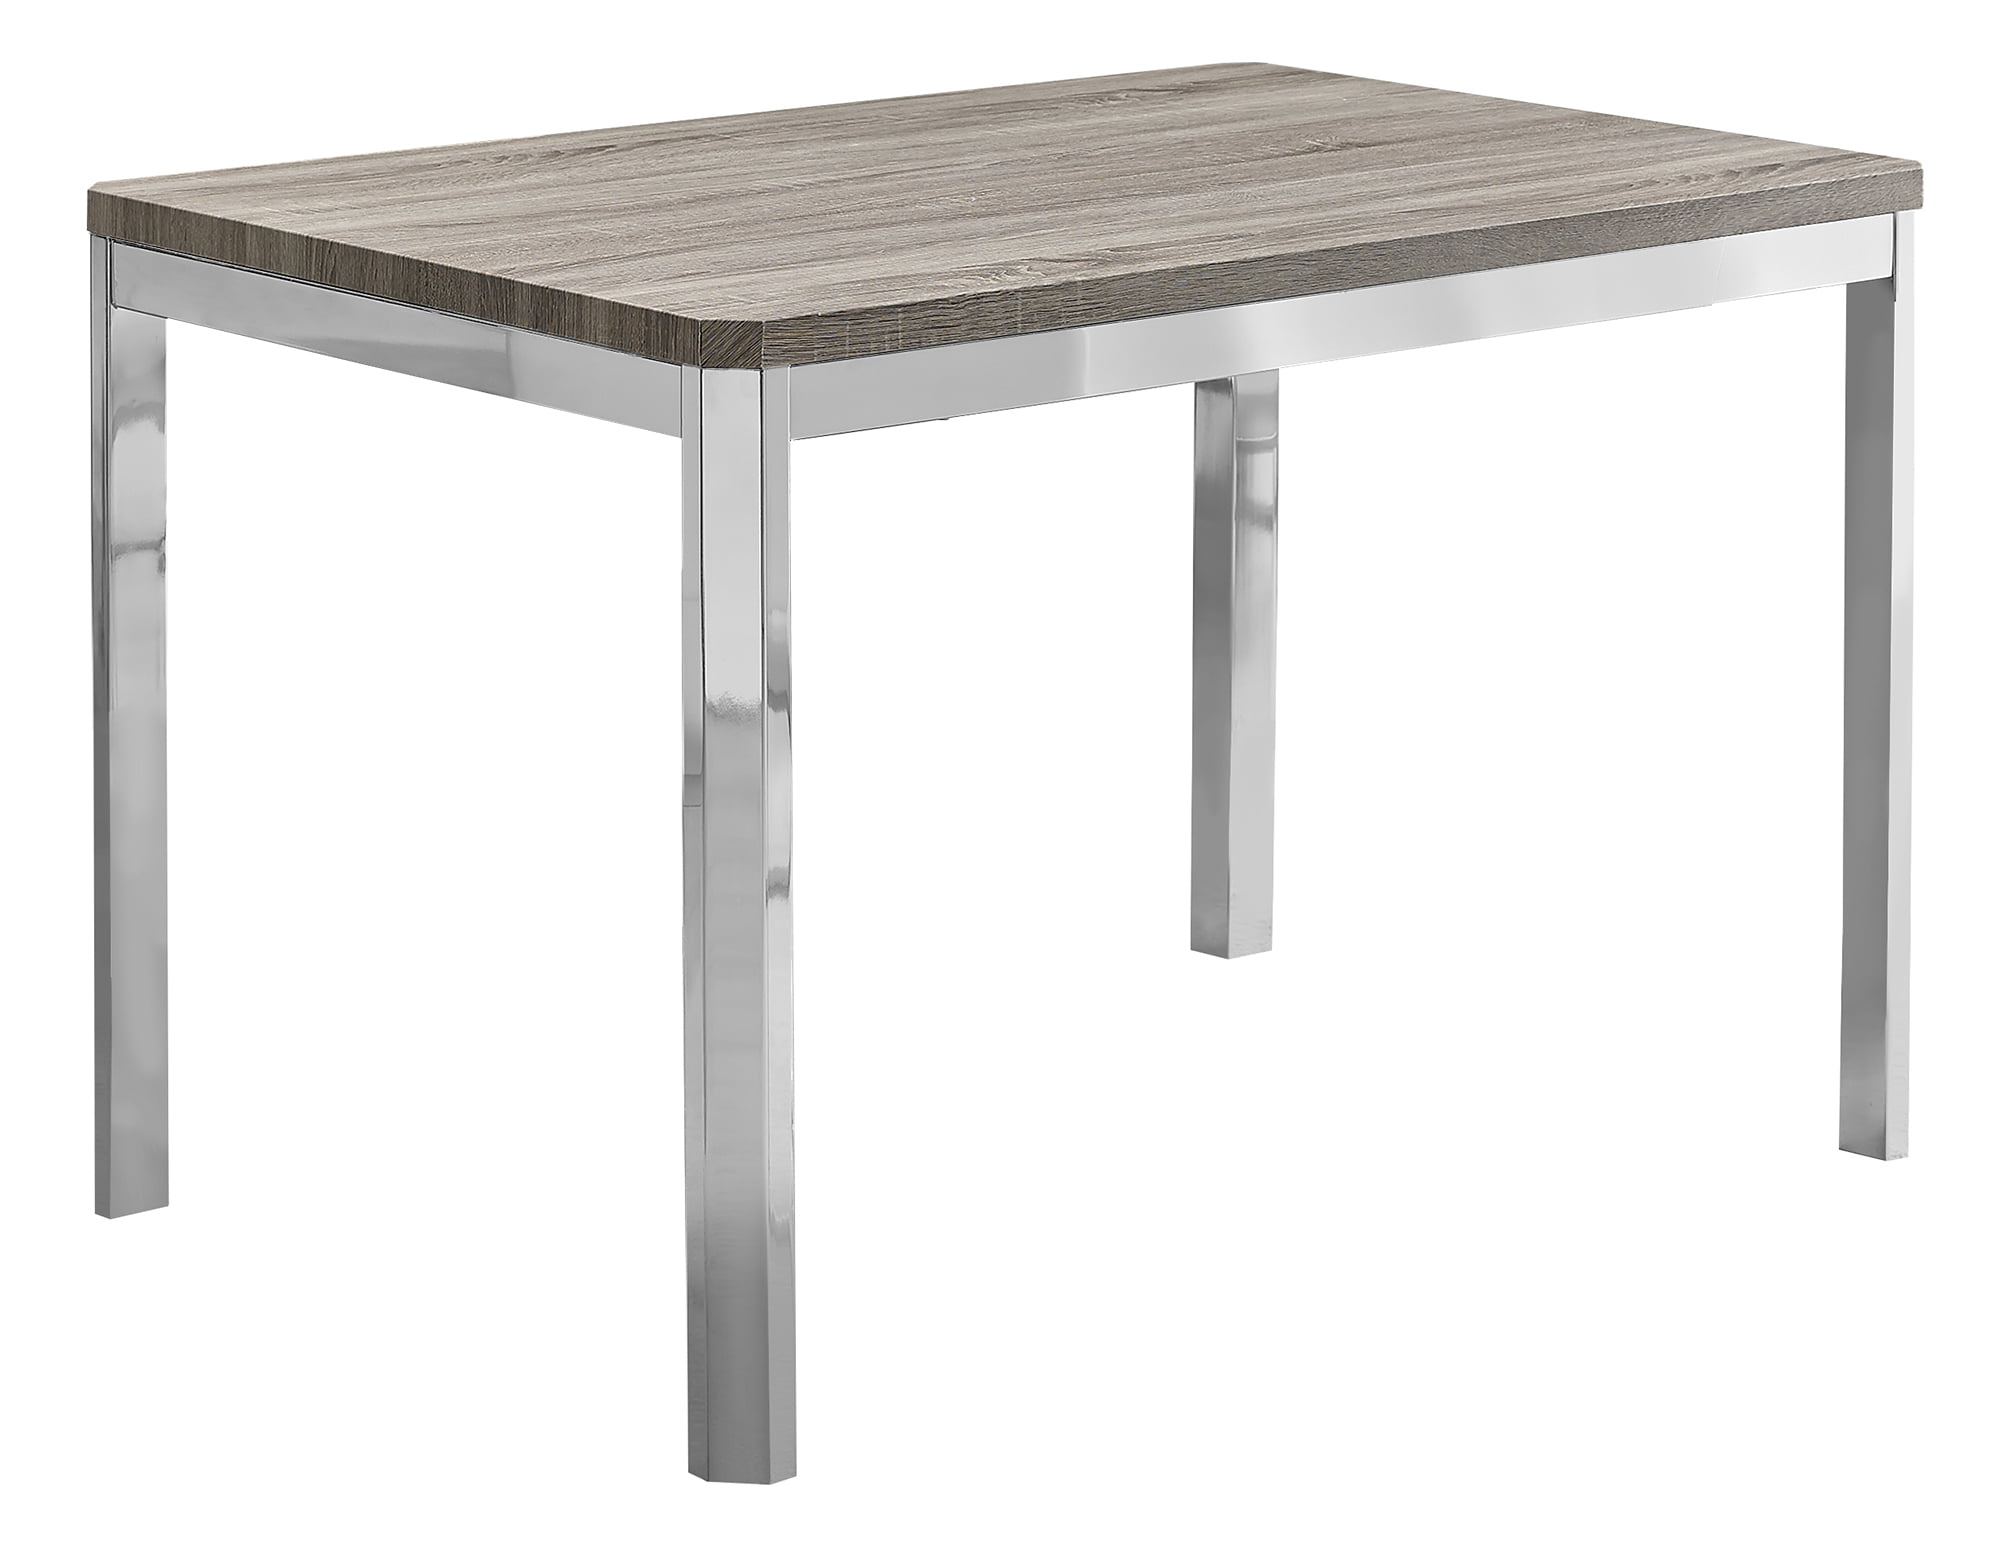 Monarch Dining Table in Dark Taupe and Chrome 